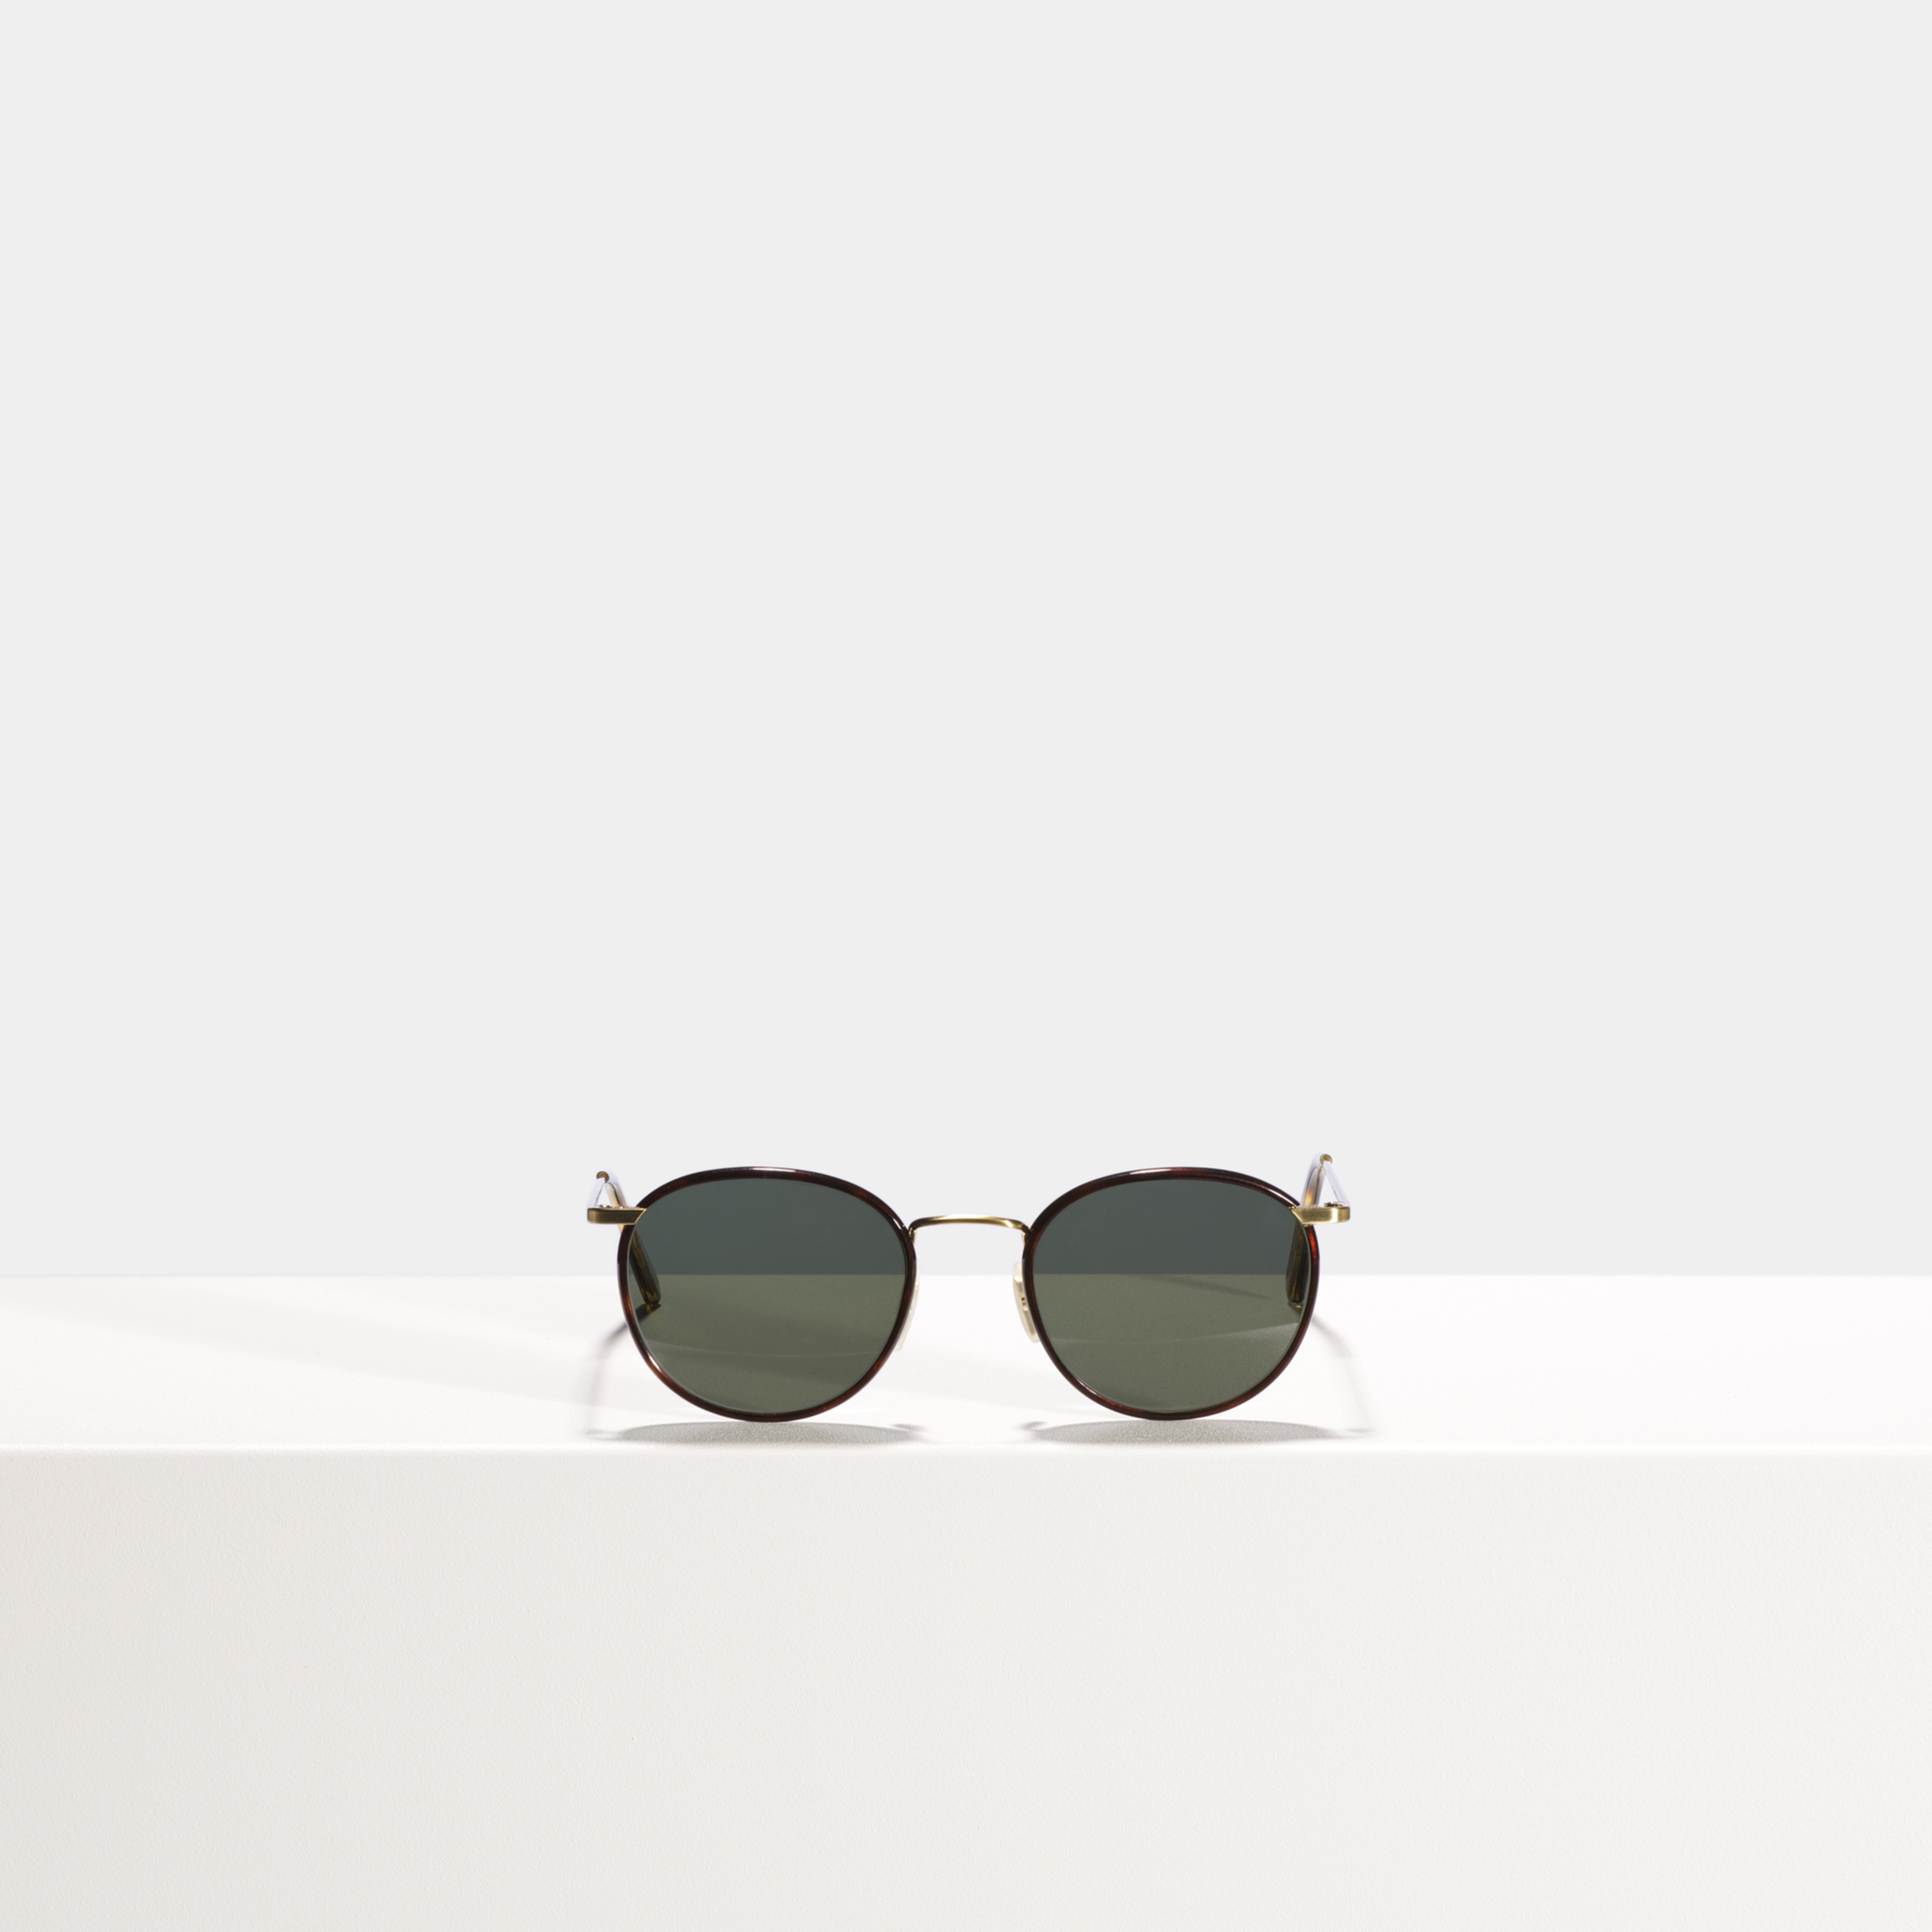 Ace & Tate Solaires | ronde métal in Marron, Or, Orange